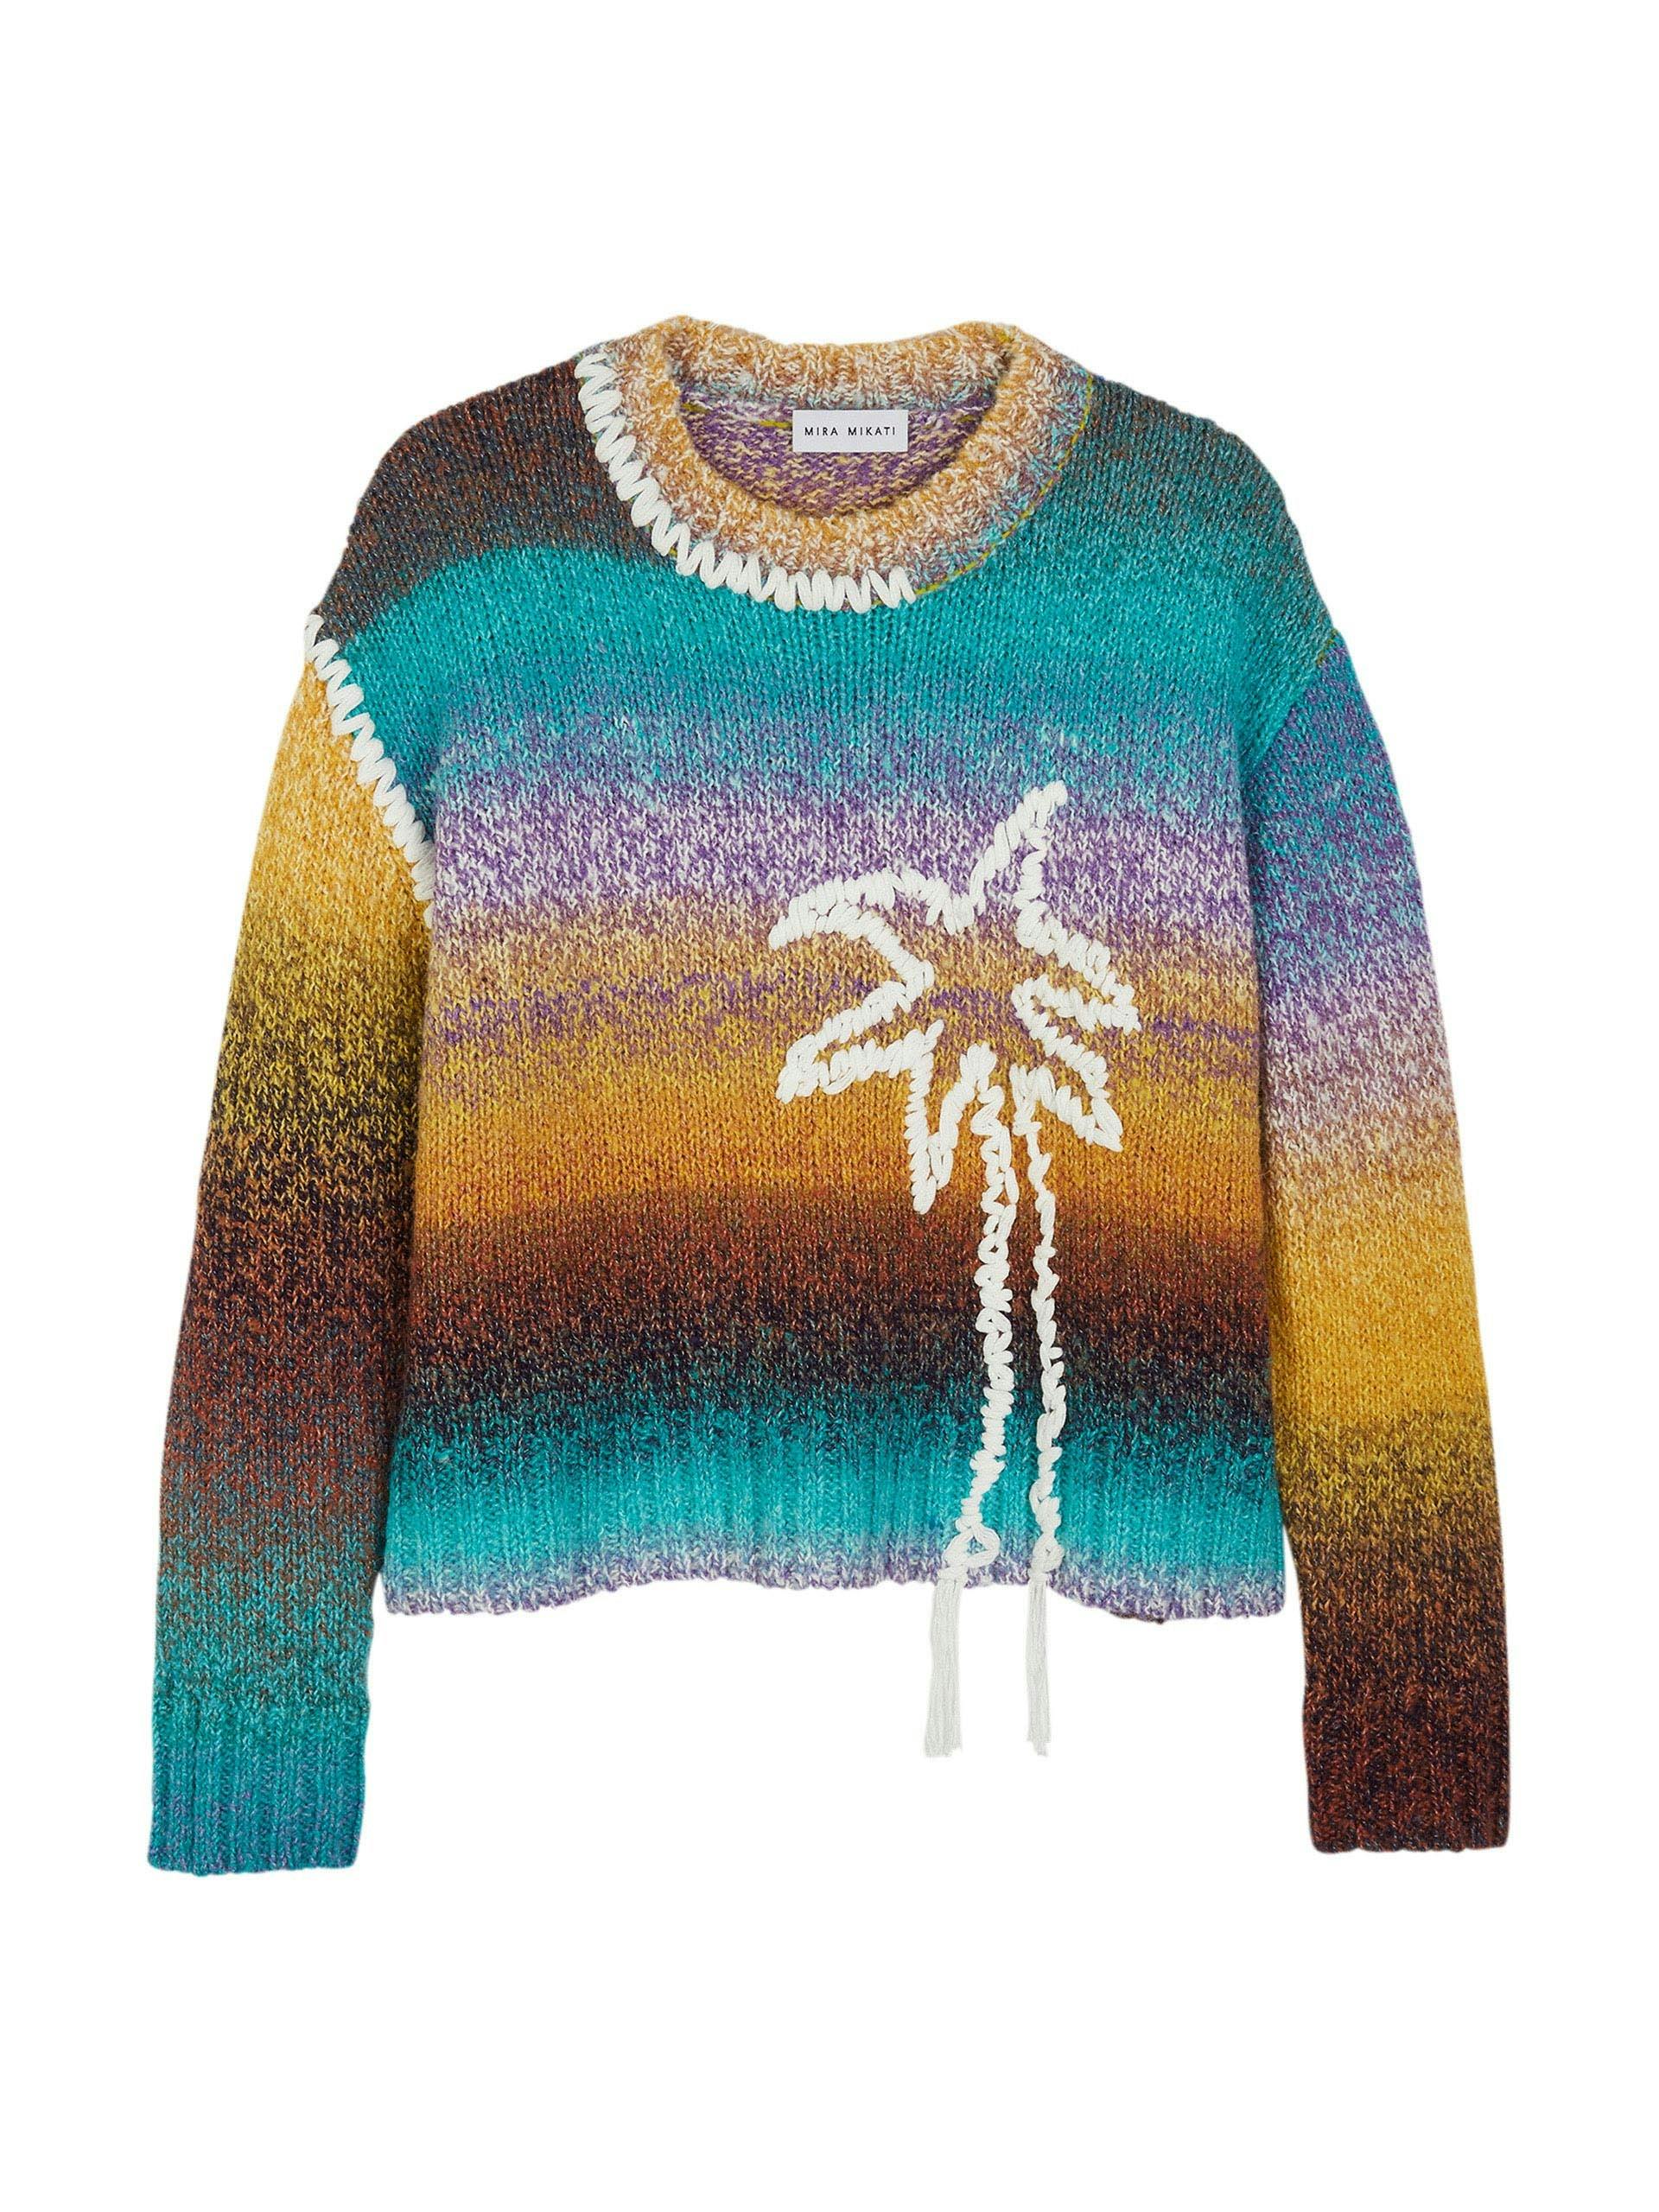 Hand embroidered palm tree jumper